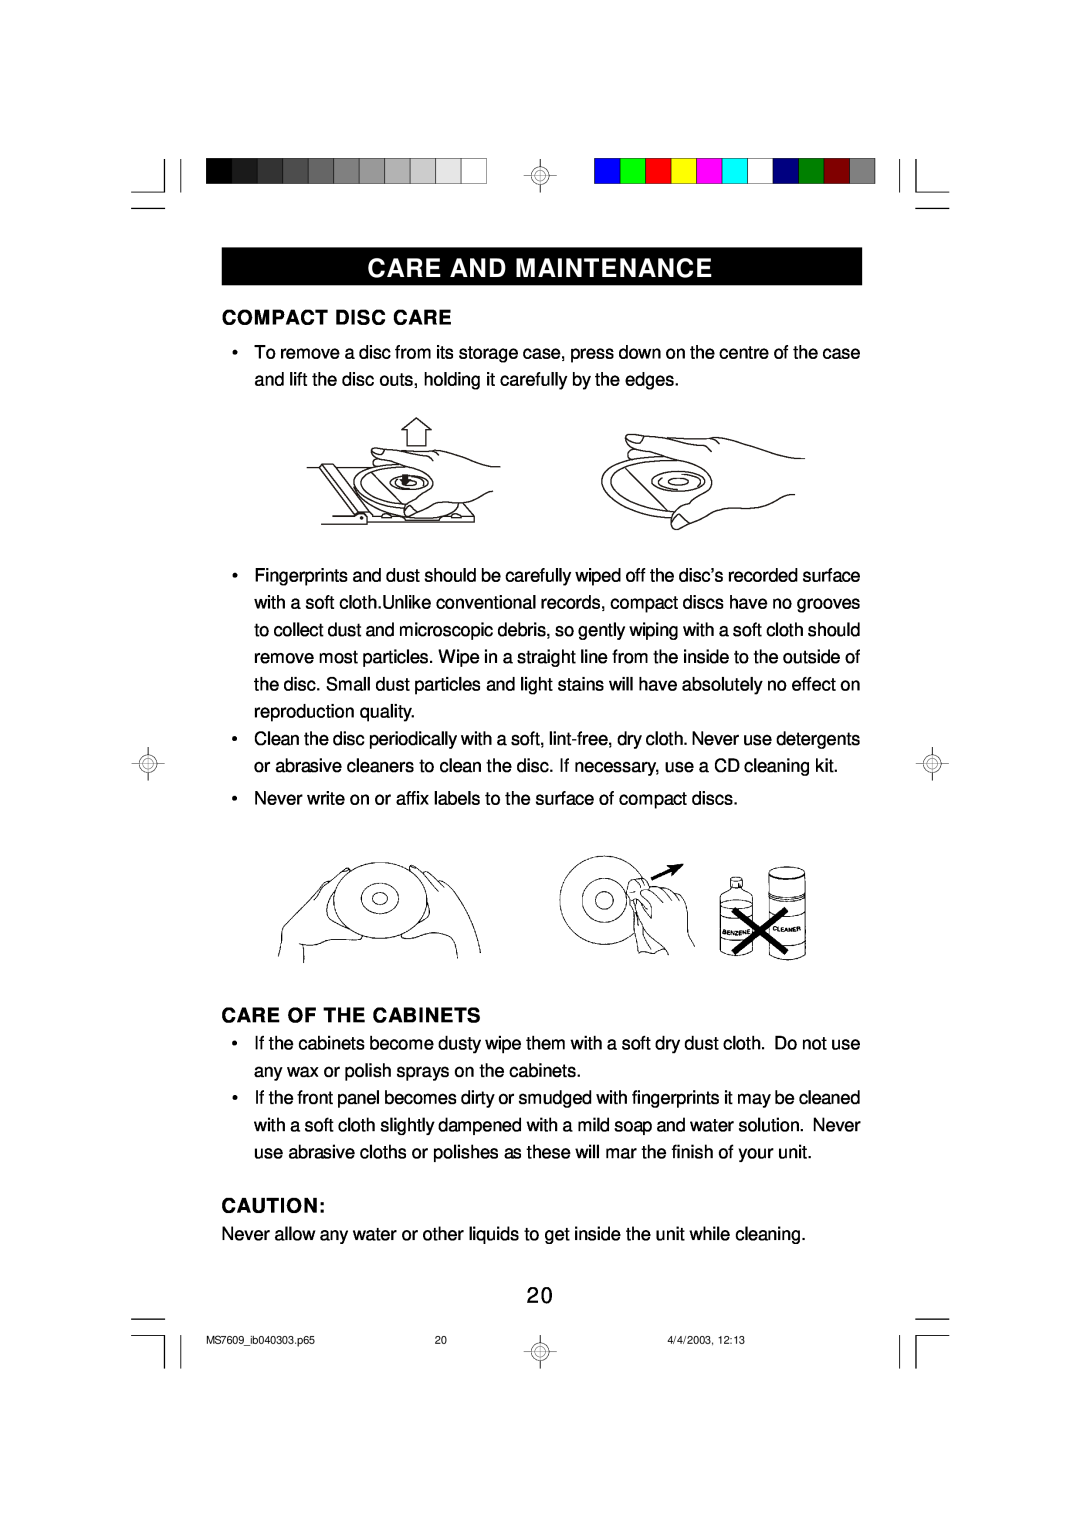 Emerson MS7609 owner manual Care And Maintenance, Compact Disc Care, Care Of The Cabinets 